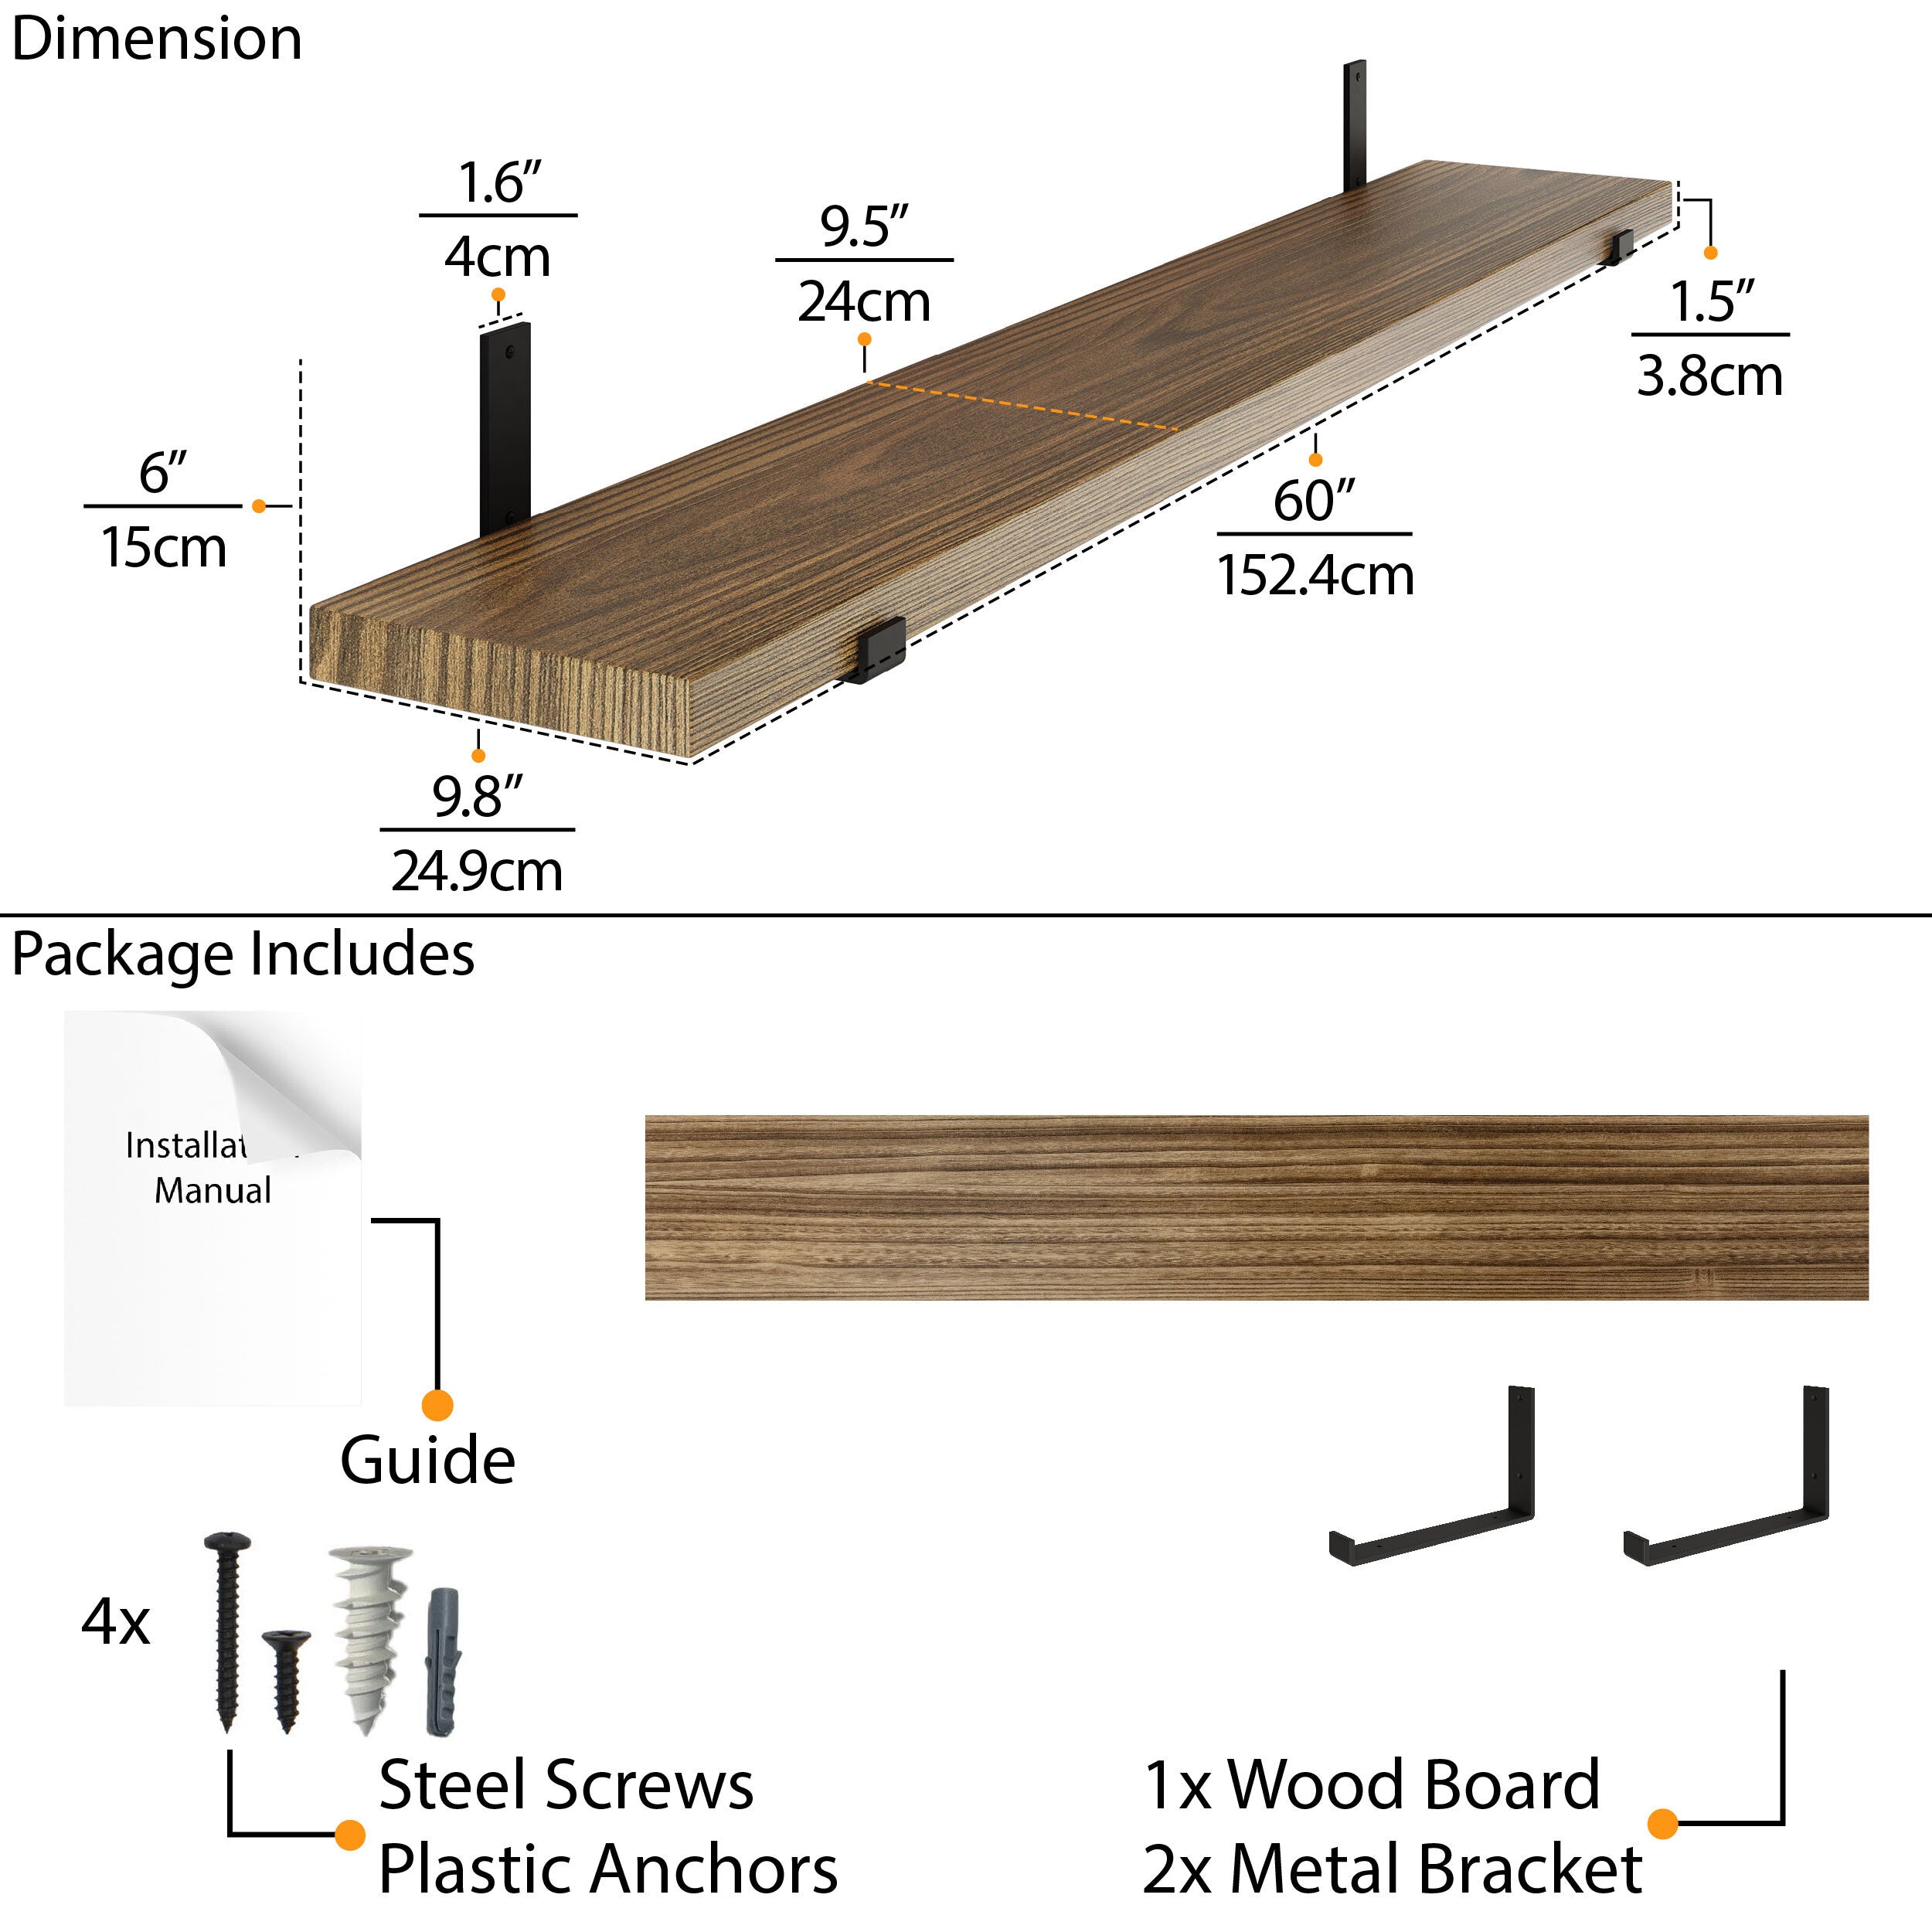 Detailed diagram showing the dimensions and components of an 60'' floating shelf burnt package, including screws and brackets for installation.